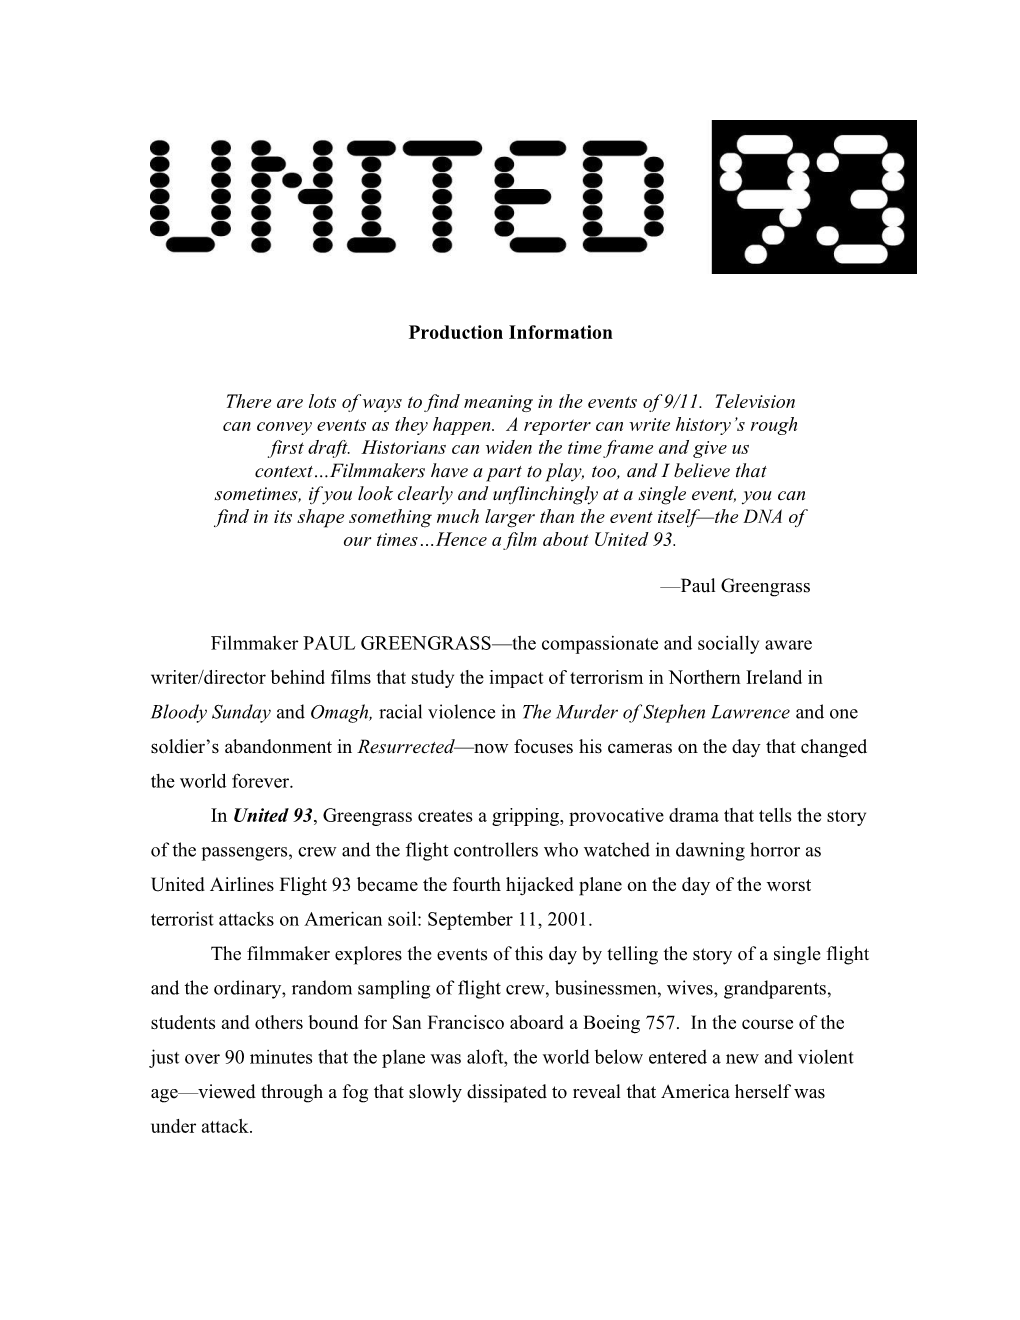 Universal Pictures and Studiocanal Present in Association with Sidney Kimmel Entertainment a Working Title Production of a Paul Greengrass Film: United 93